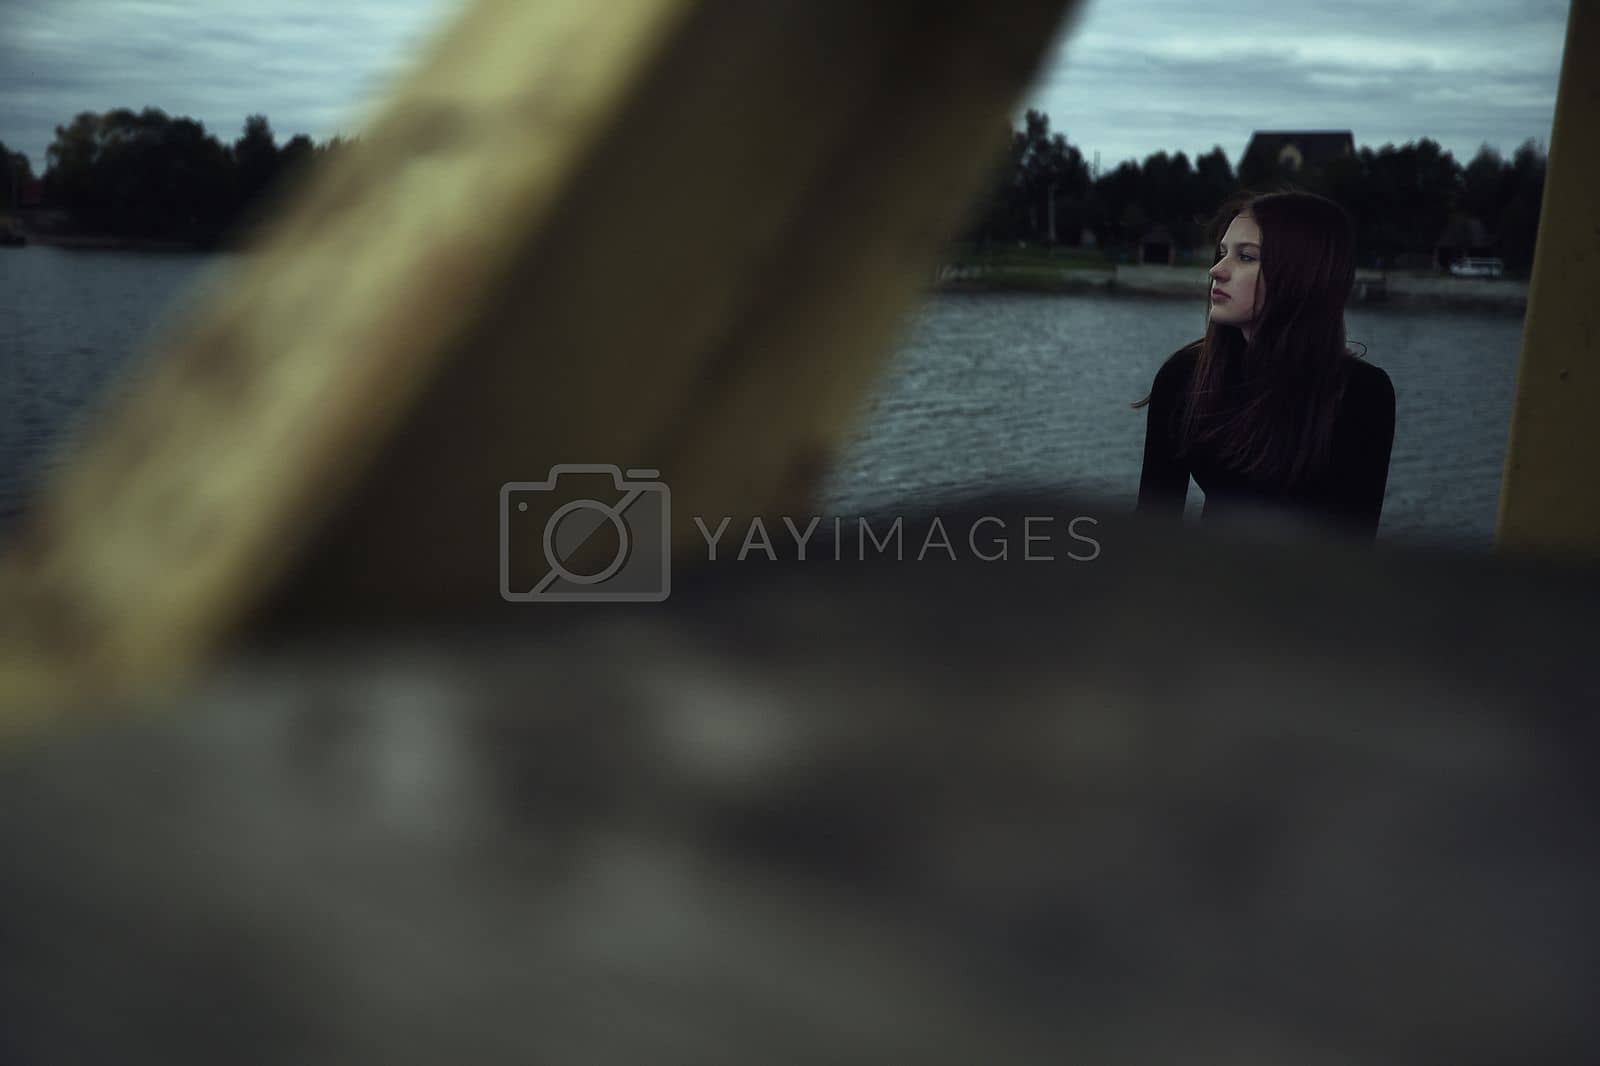 Royalty free image of girl bullying loneliness by the water lake teenager alone in solitude trying isolation cope with anger and find strength in the evening gloomy photo abandonment thinking about fate is not easy and hard mooring at the pier by marselin888